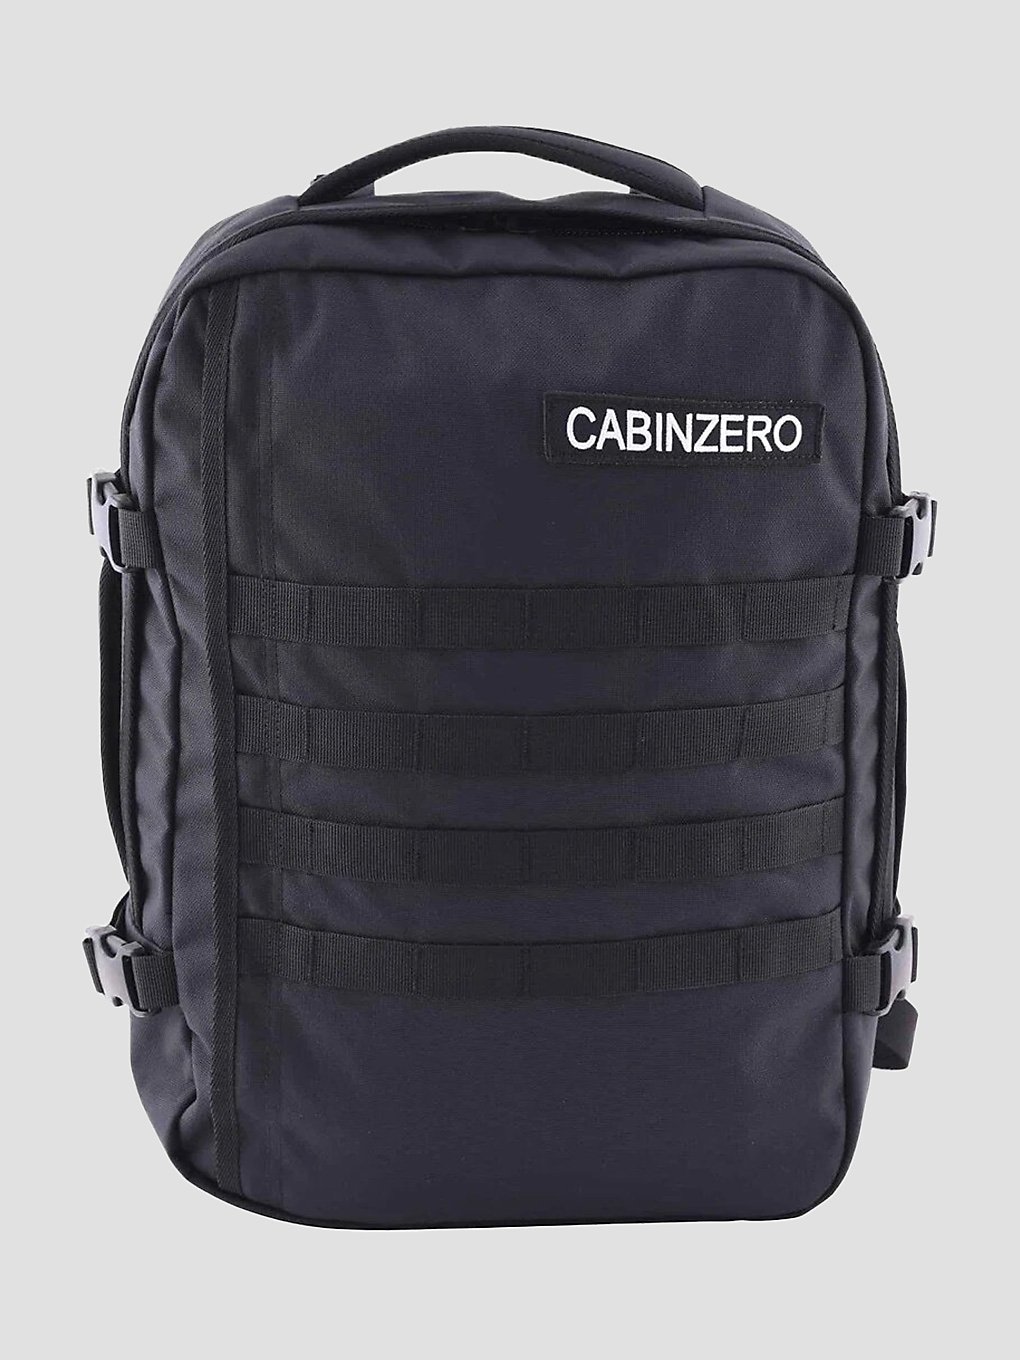 Cabin Zero Military 28L Cabin Backpack absolute black kaufen